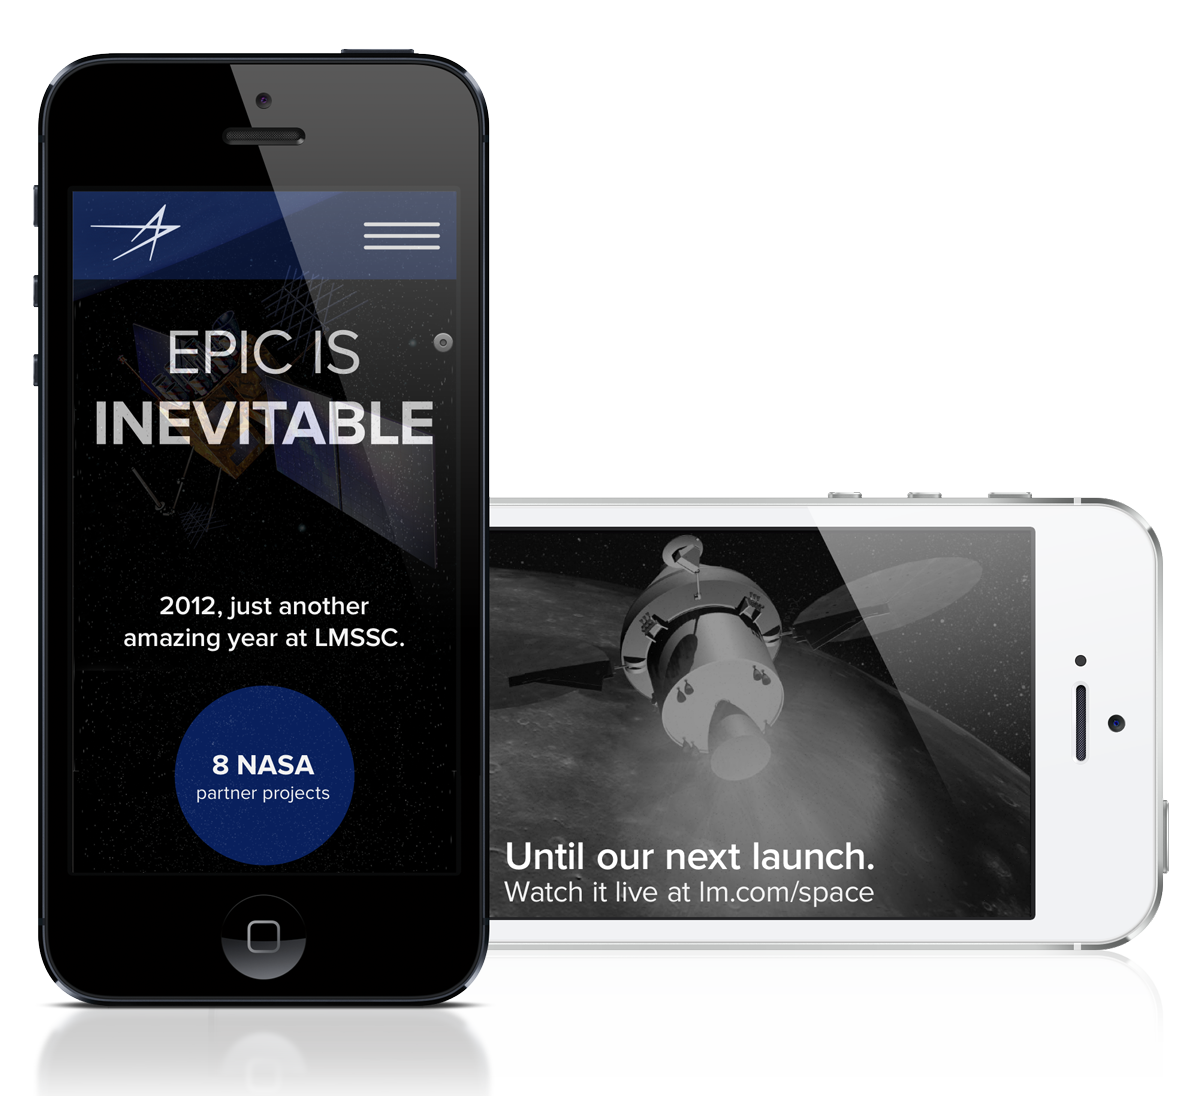 Two iPhone 5s, one in portrait and one in landscape, displaying a mobile-friendly website. The website has a slogan saying epic is inevitable and promotes viewing a live satellite launch.